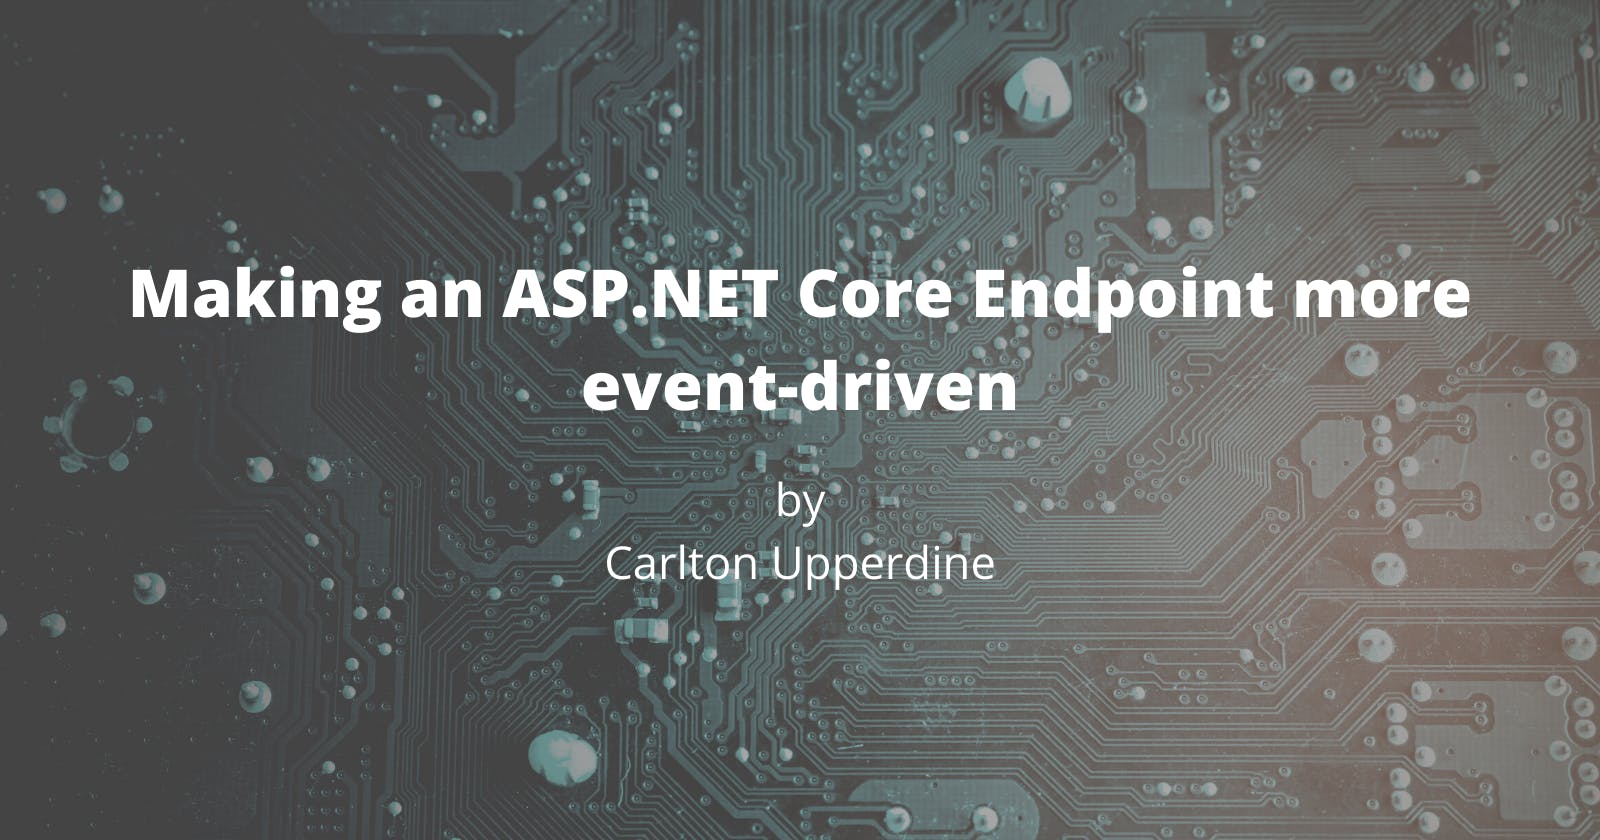 Making an ASP.NET Core Endpoint more event-driven